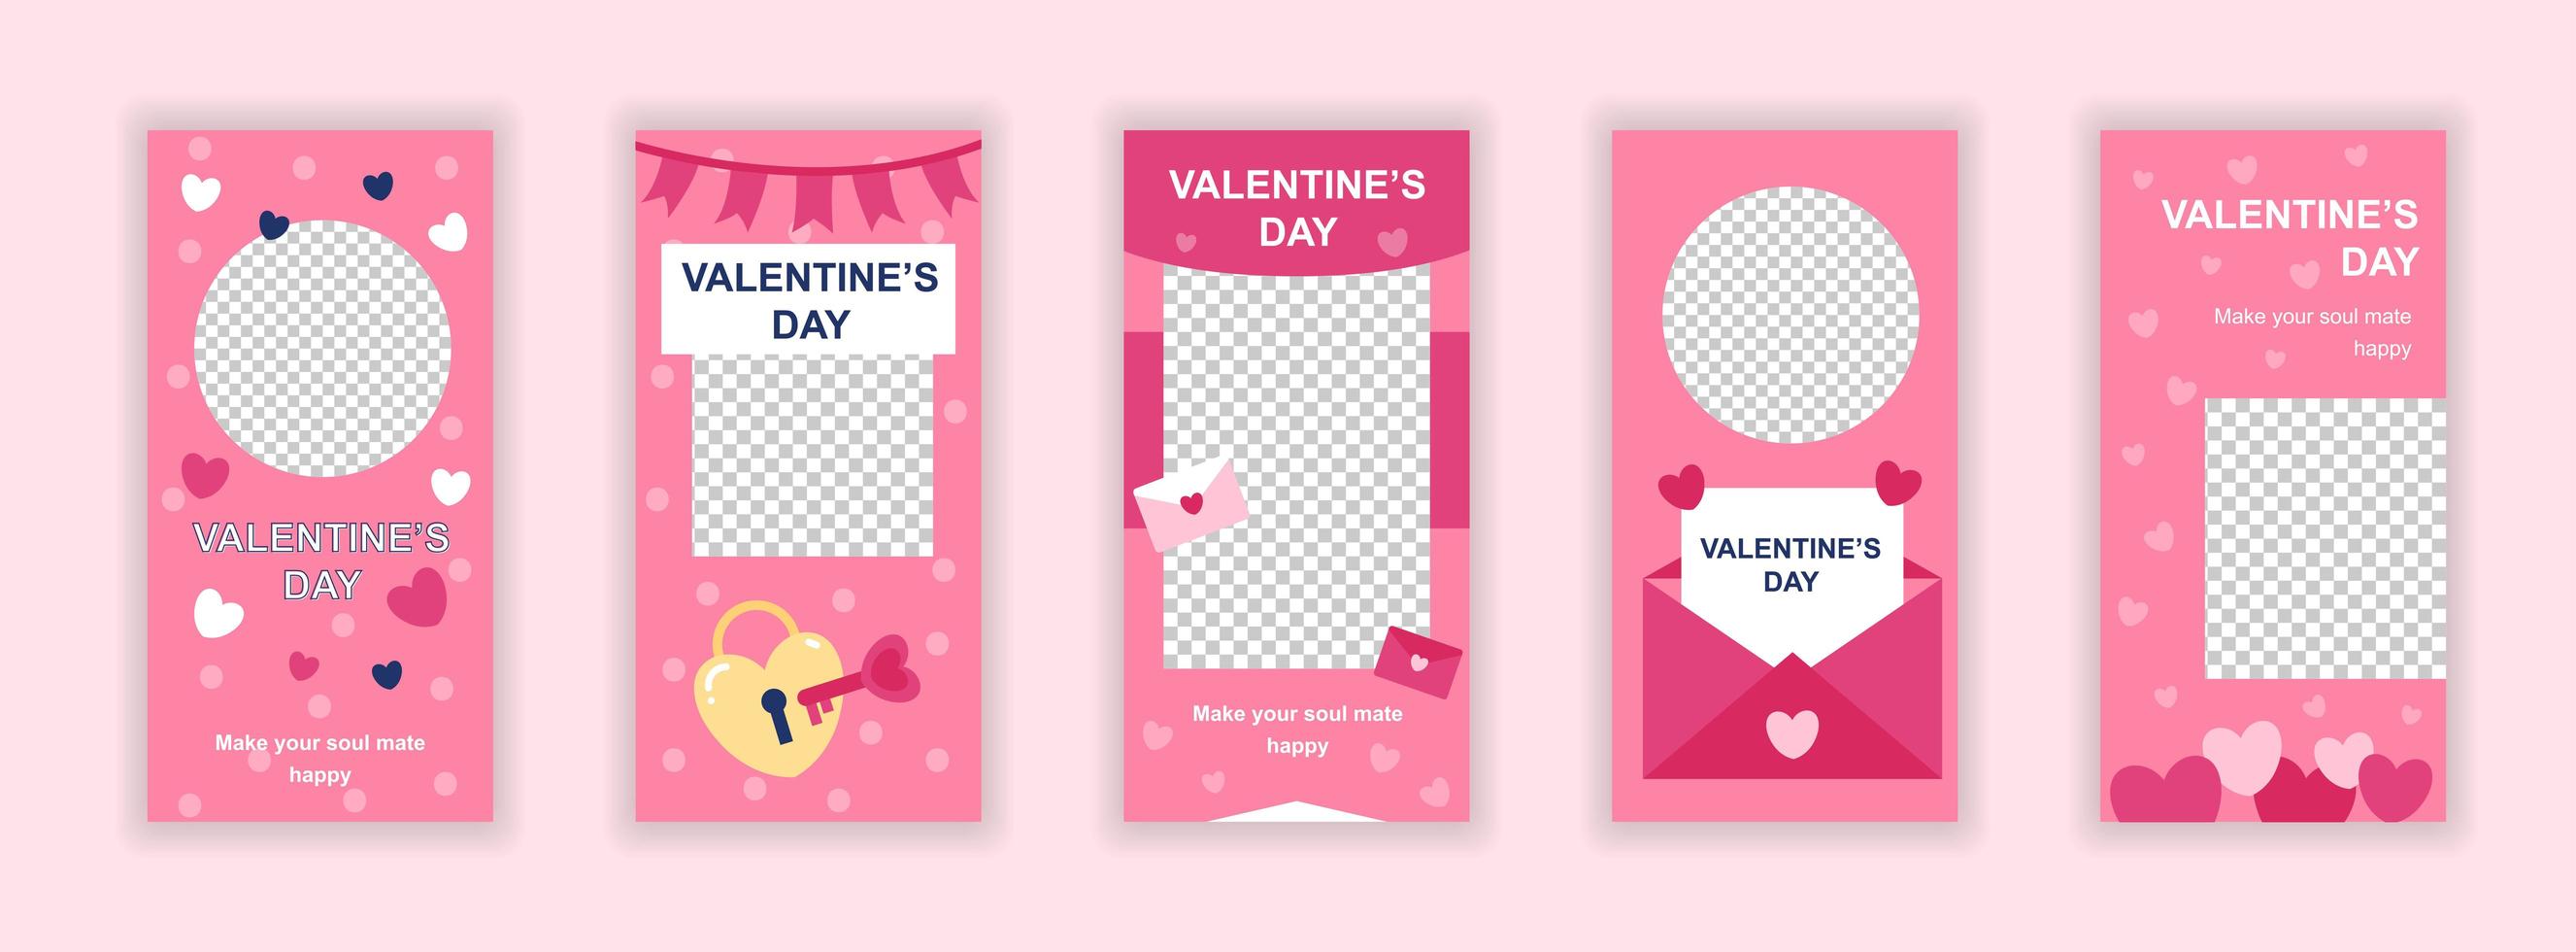 Valentines day editable templates set for social media stories. vector